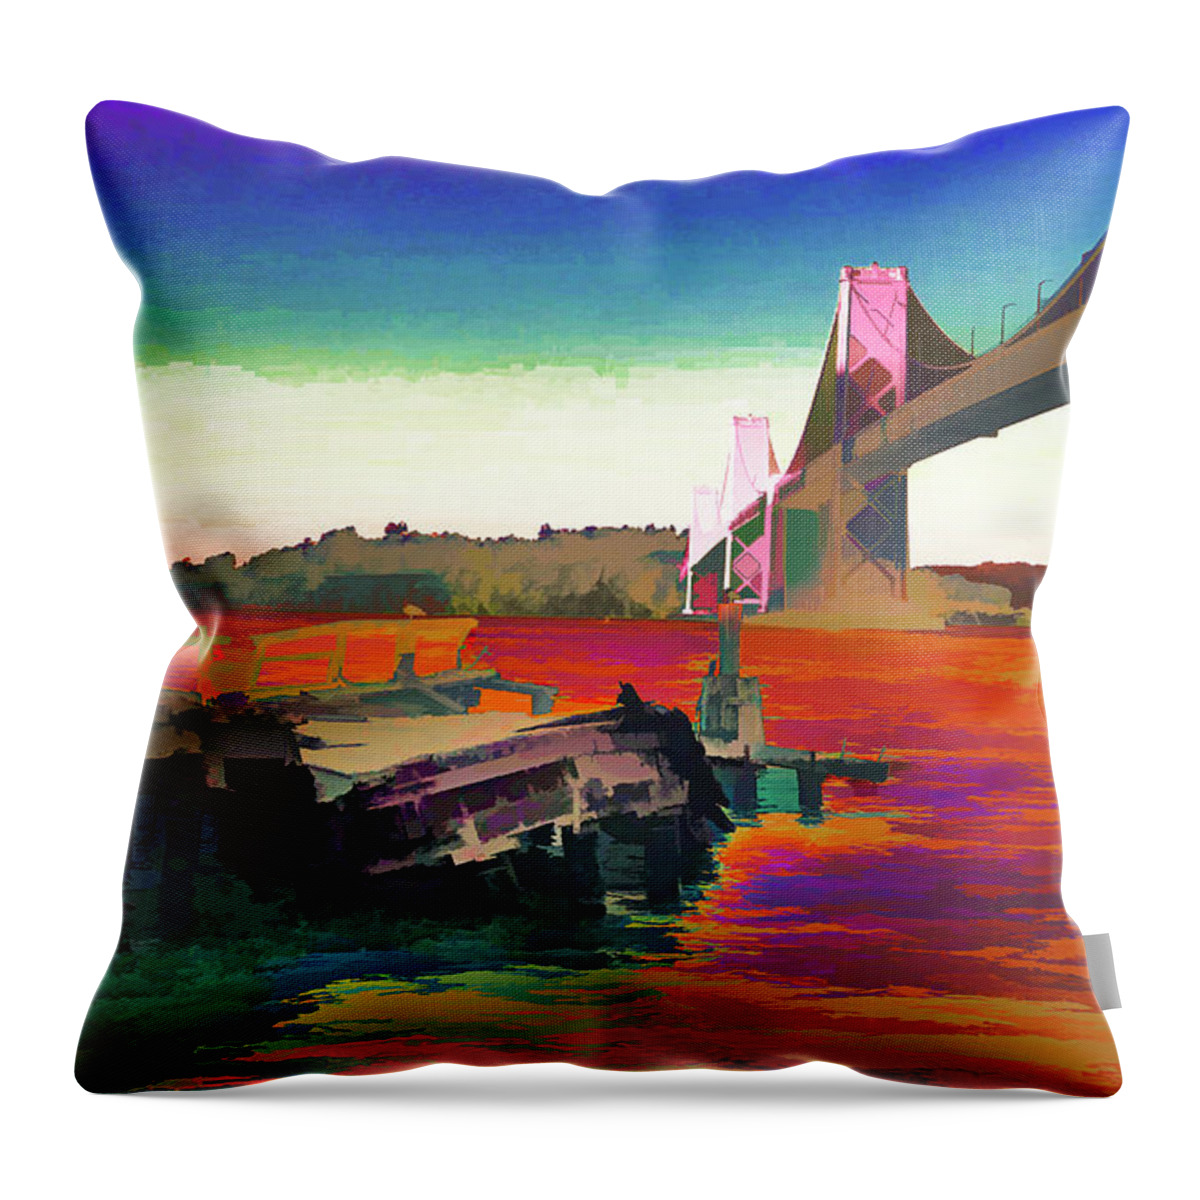 Global Warming Throw Pillow featuring the photograph Global Warming by Jessica Levant